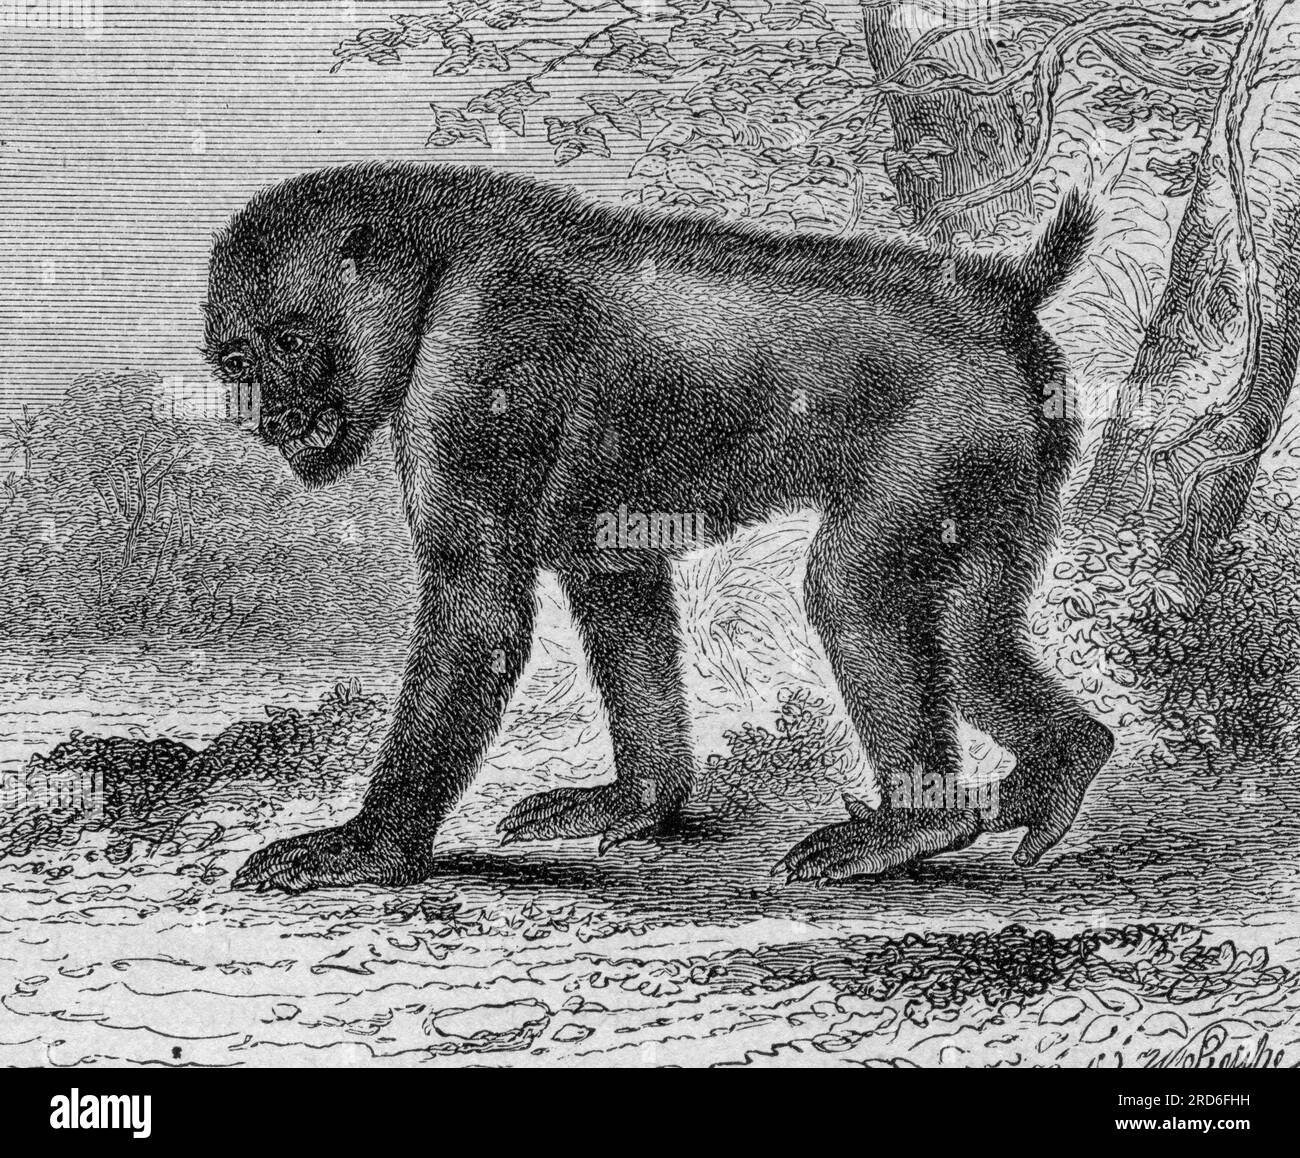 zoology / animals, monkey, mandril (Mandrillus sphinx), wood engraving, 19th century, ARTIST'S COPYRIGHT HAS NOT TO BE CLEARED Stock Photo